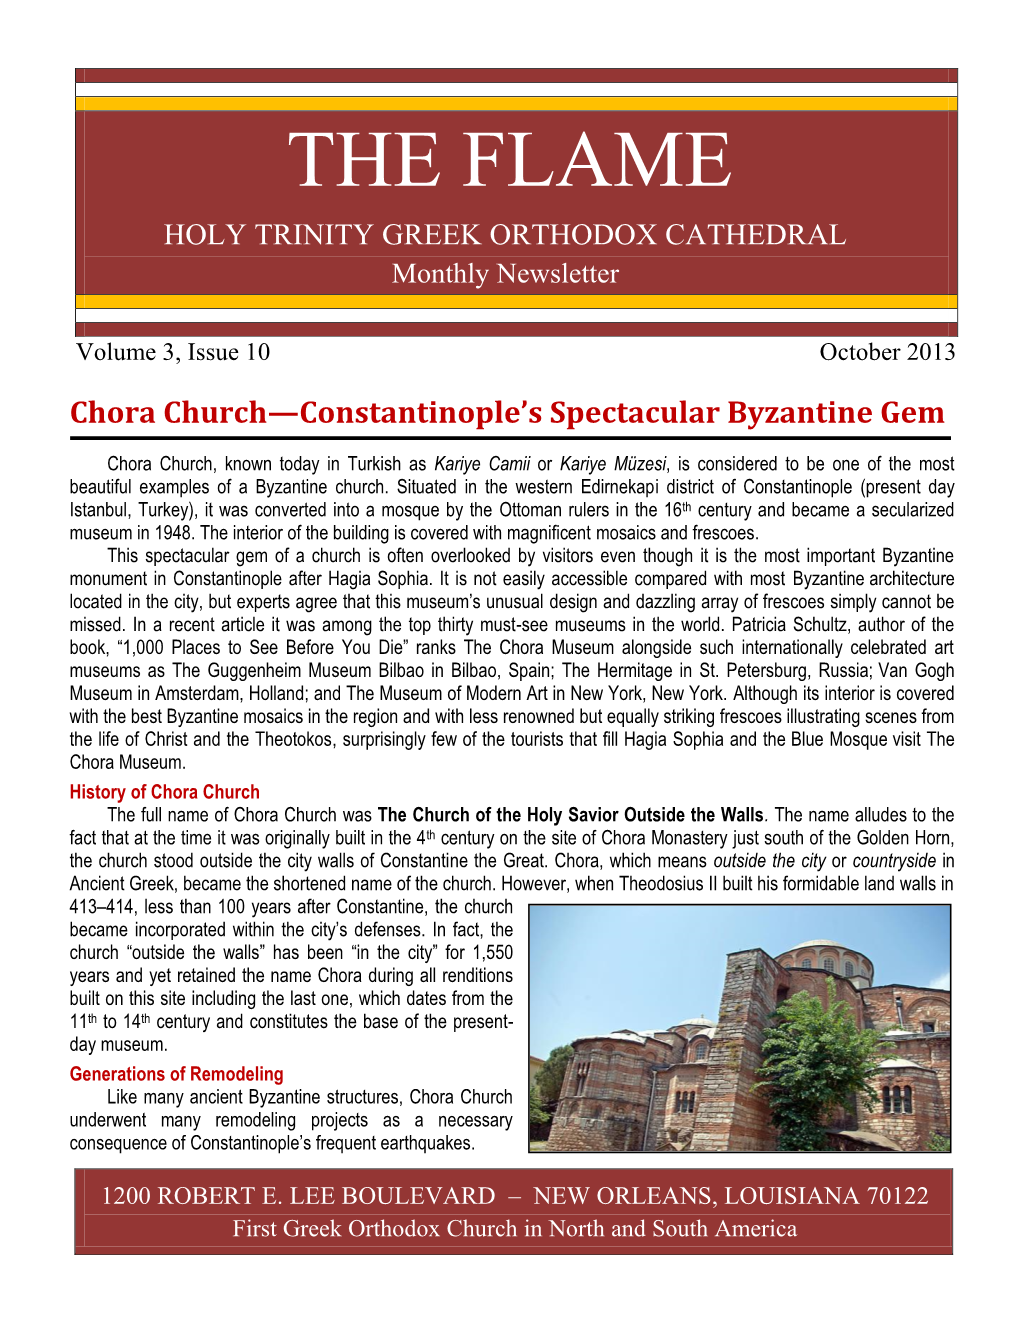 THE FLAME HOLY TRINITY GREEK ORTHODOX CATHEDRAL Monthly Newsletter